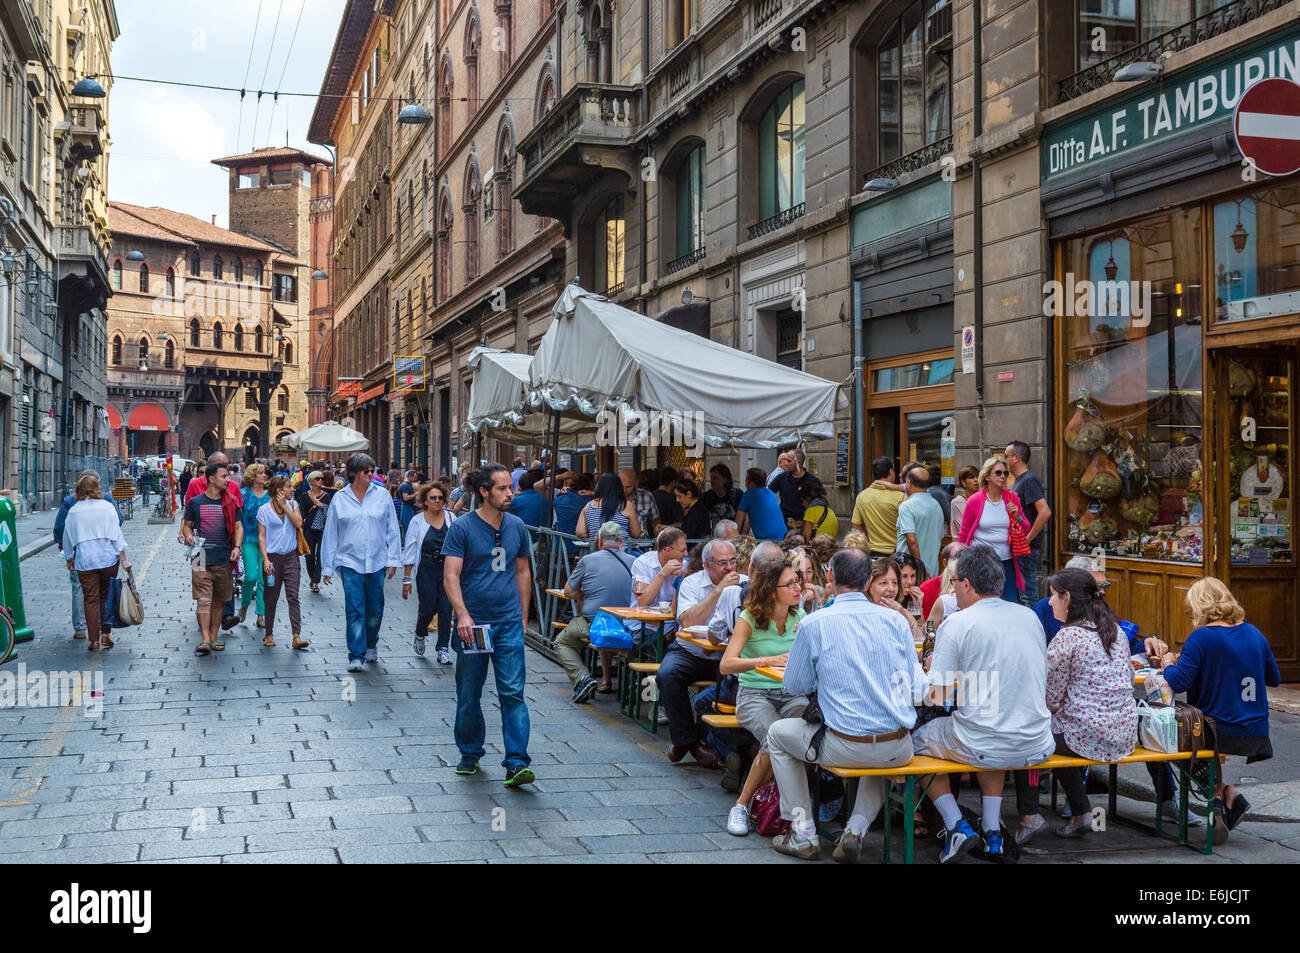 Shops and cafe on Via Caprarie in the historic Quadrilatero market district, Bologna, Emilia Romagna, Italy Stock Photo